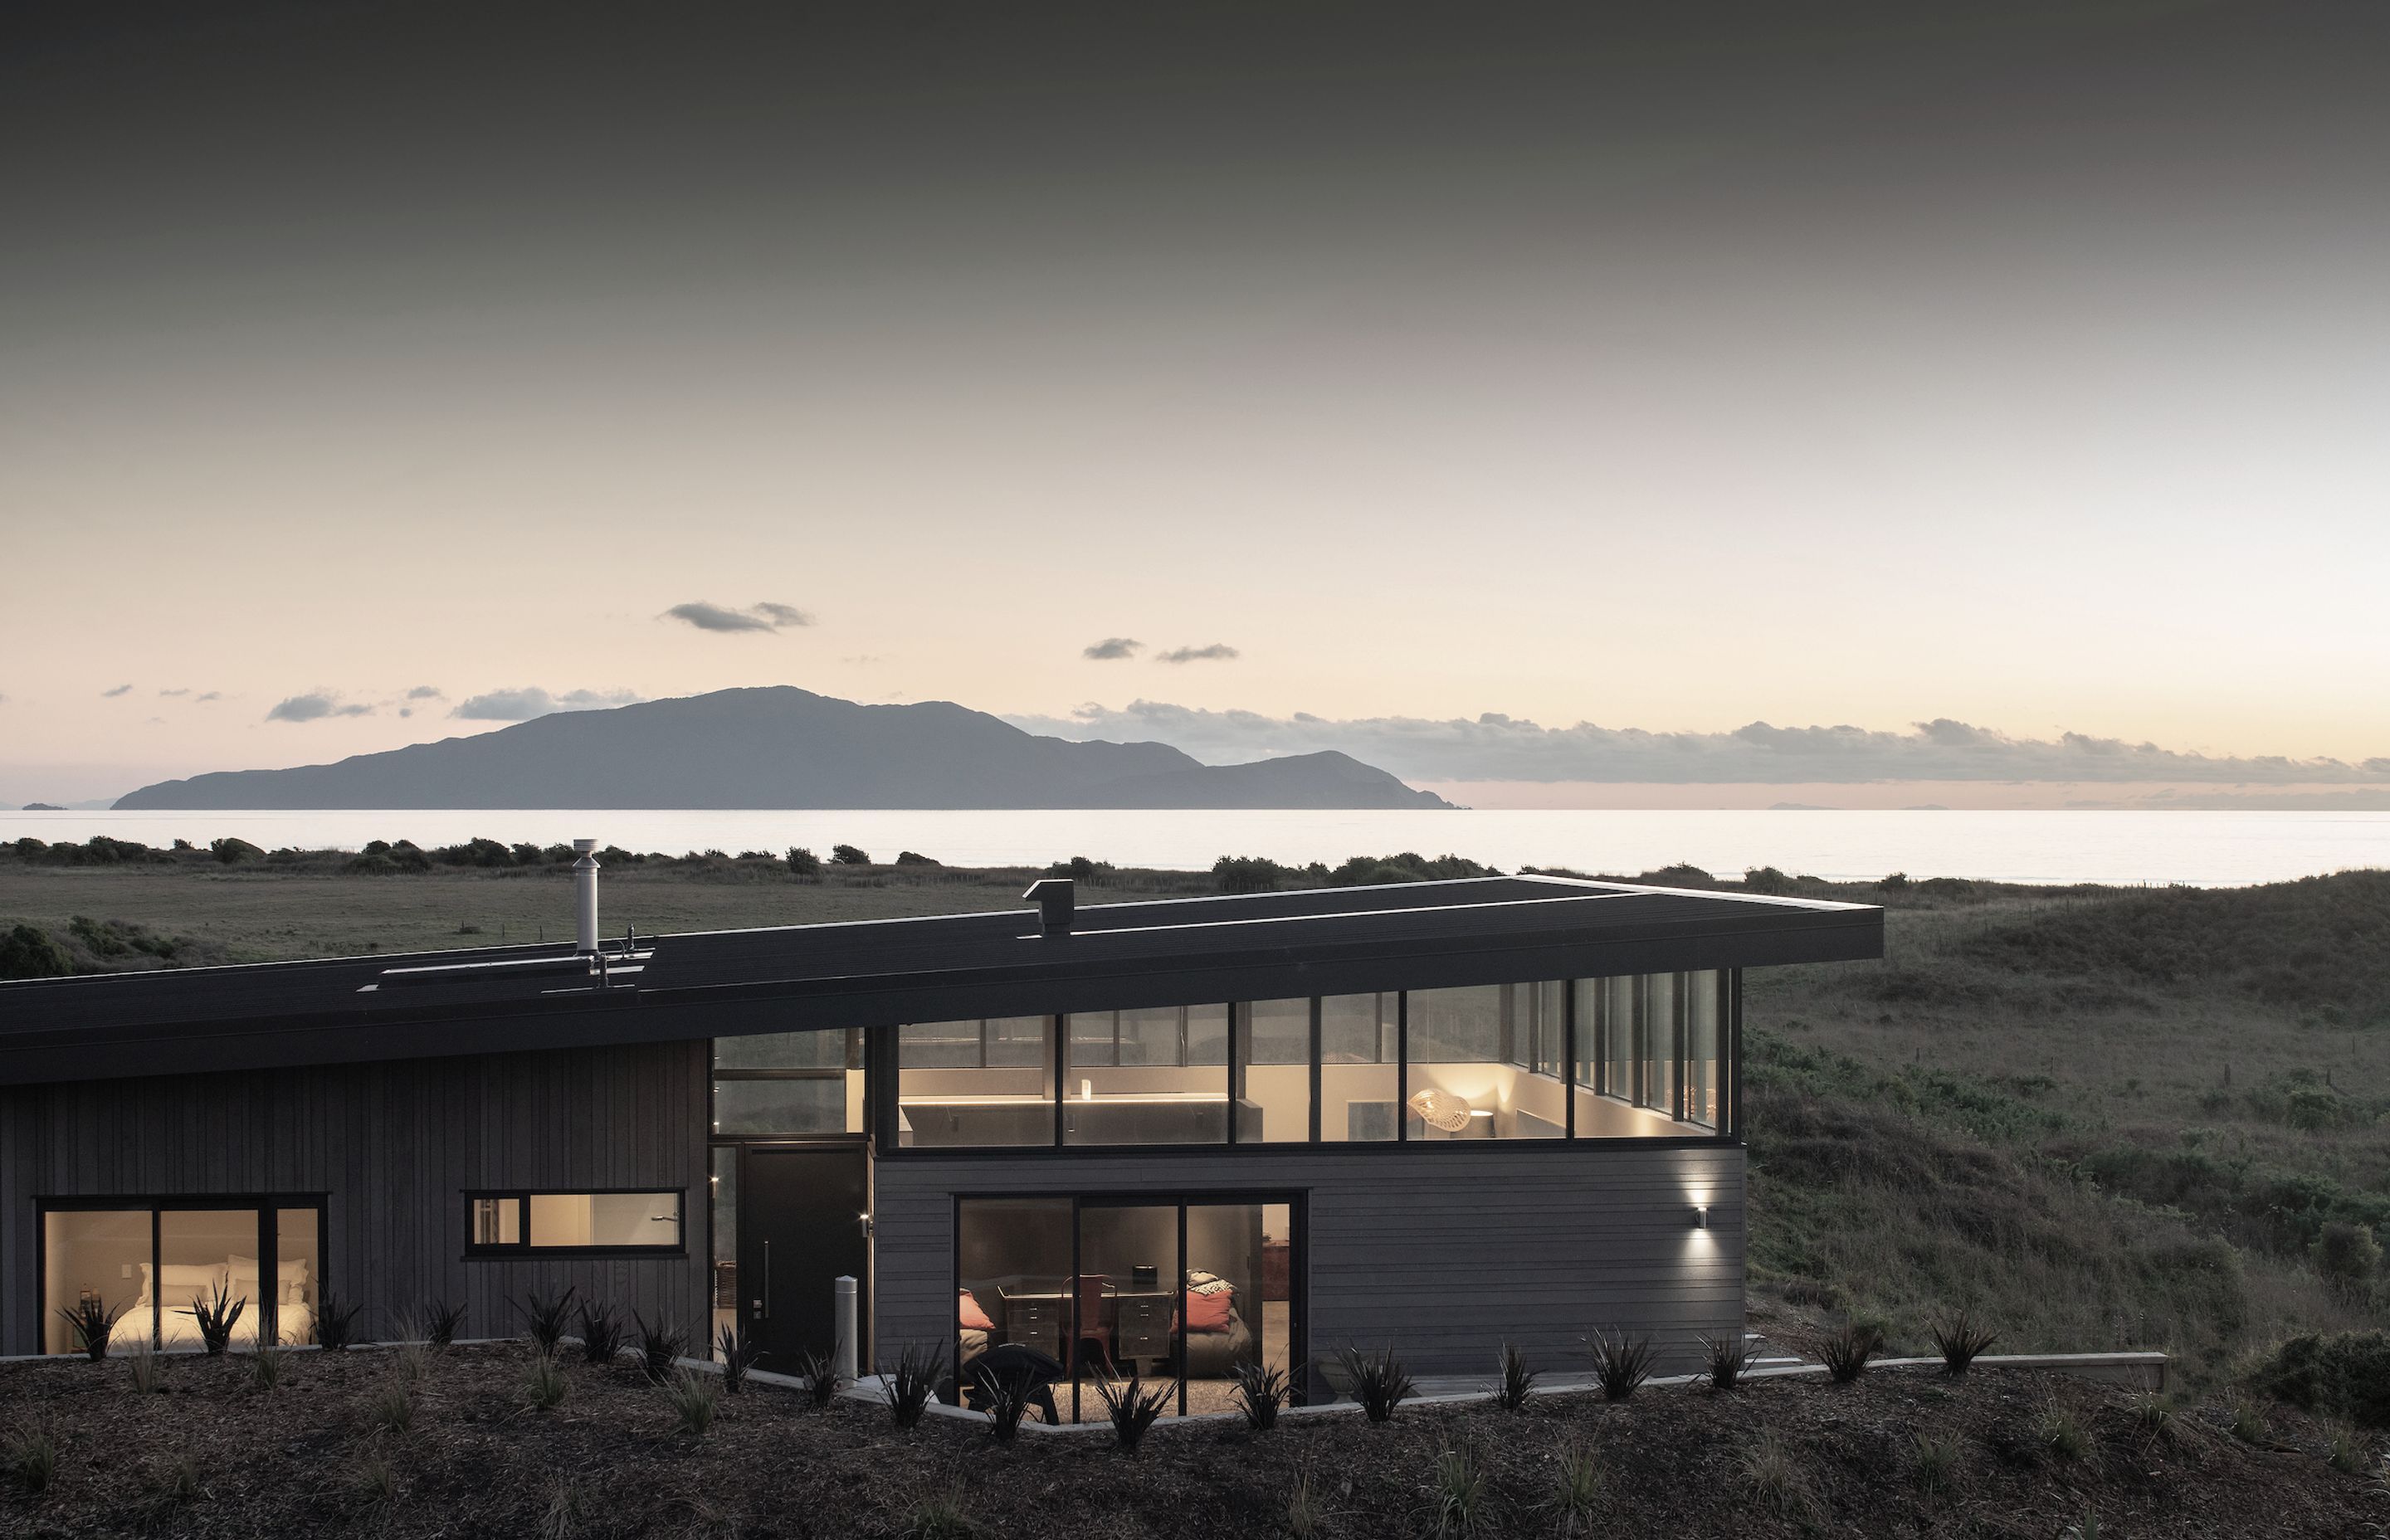 The view across the dunes and water towards Kapiti Island was a significant factor in the siting of the house.